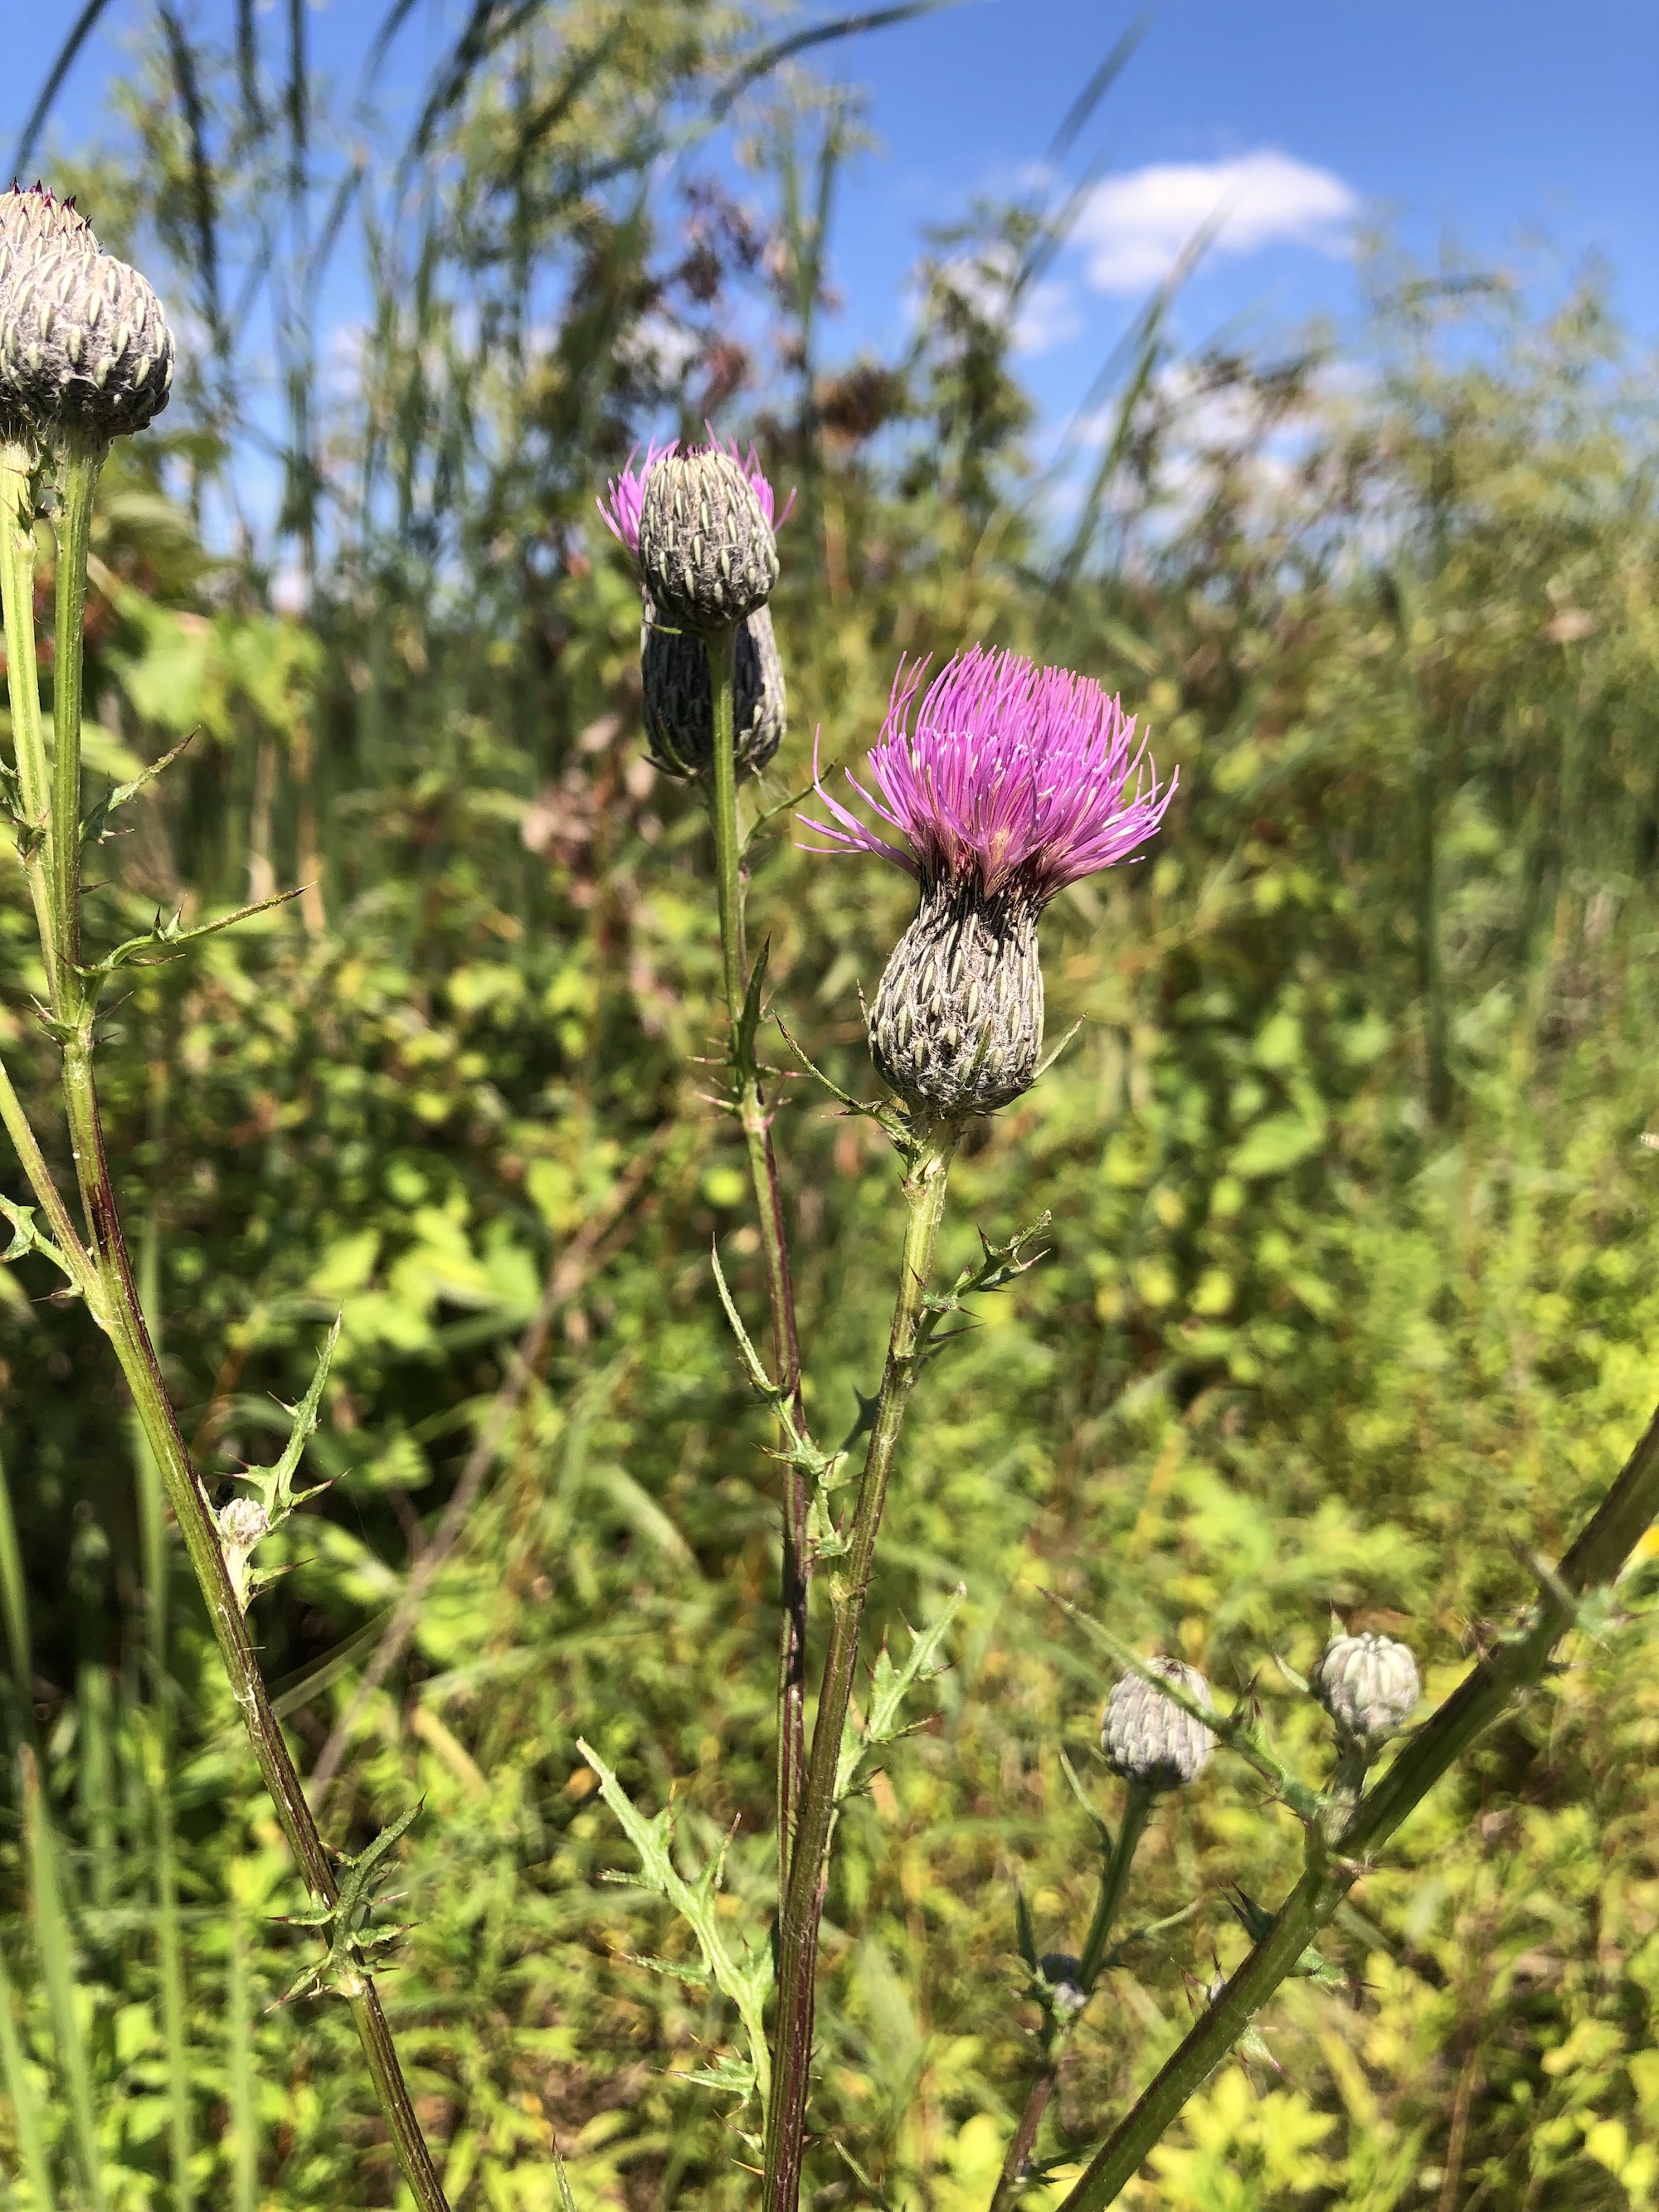 Swamp Thistle near cattails along shore of Lake Wingra along Arboretum Drive in Madison, Wisconsin on August 22, 2022.